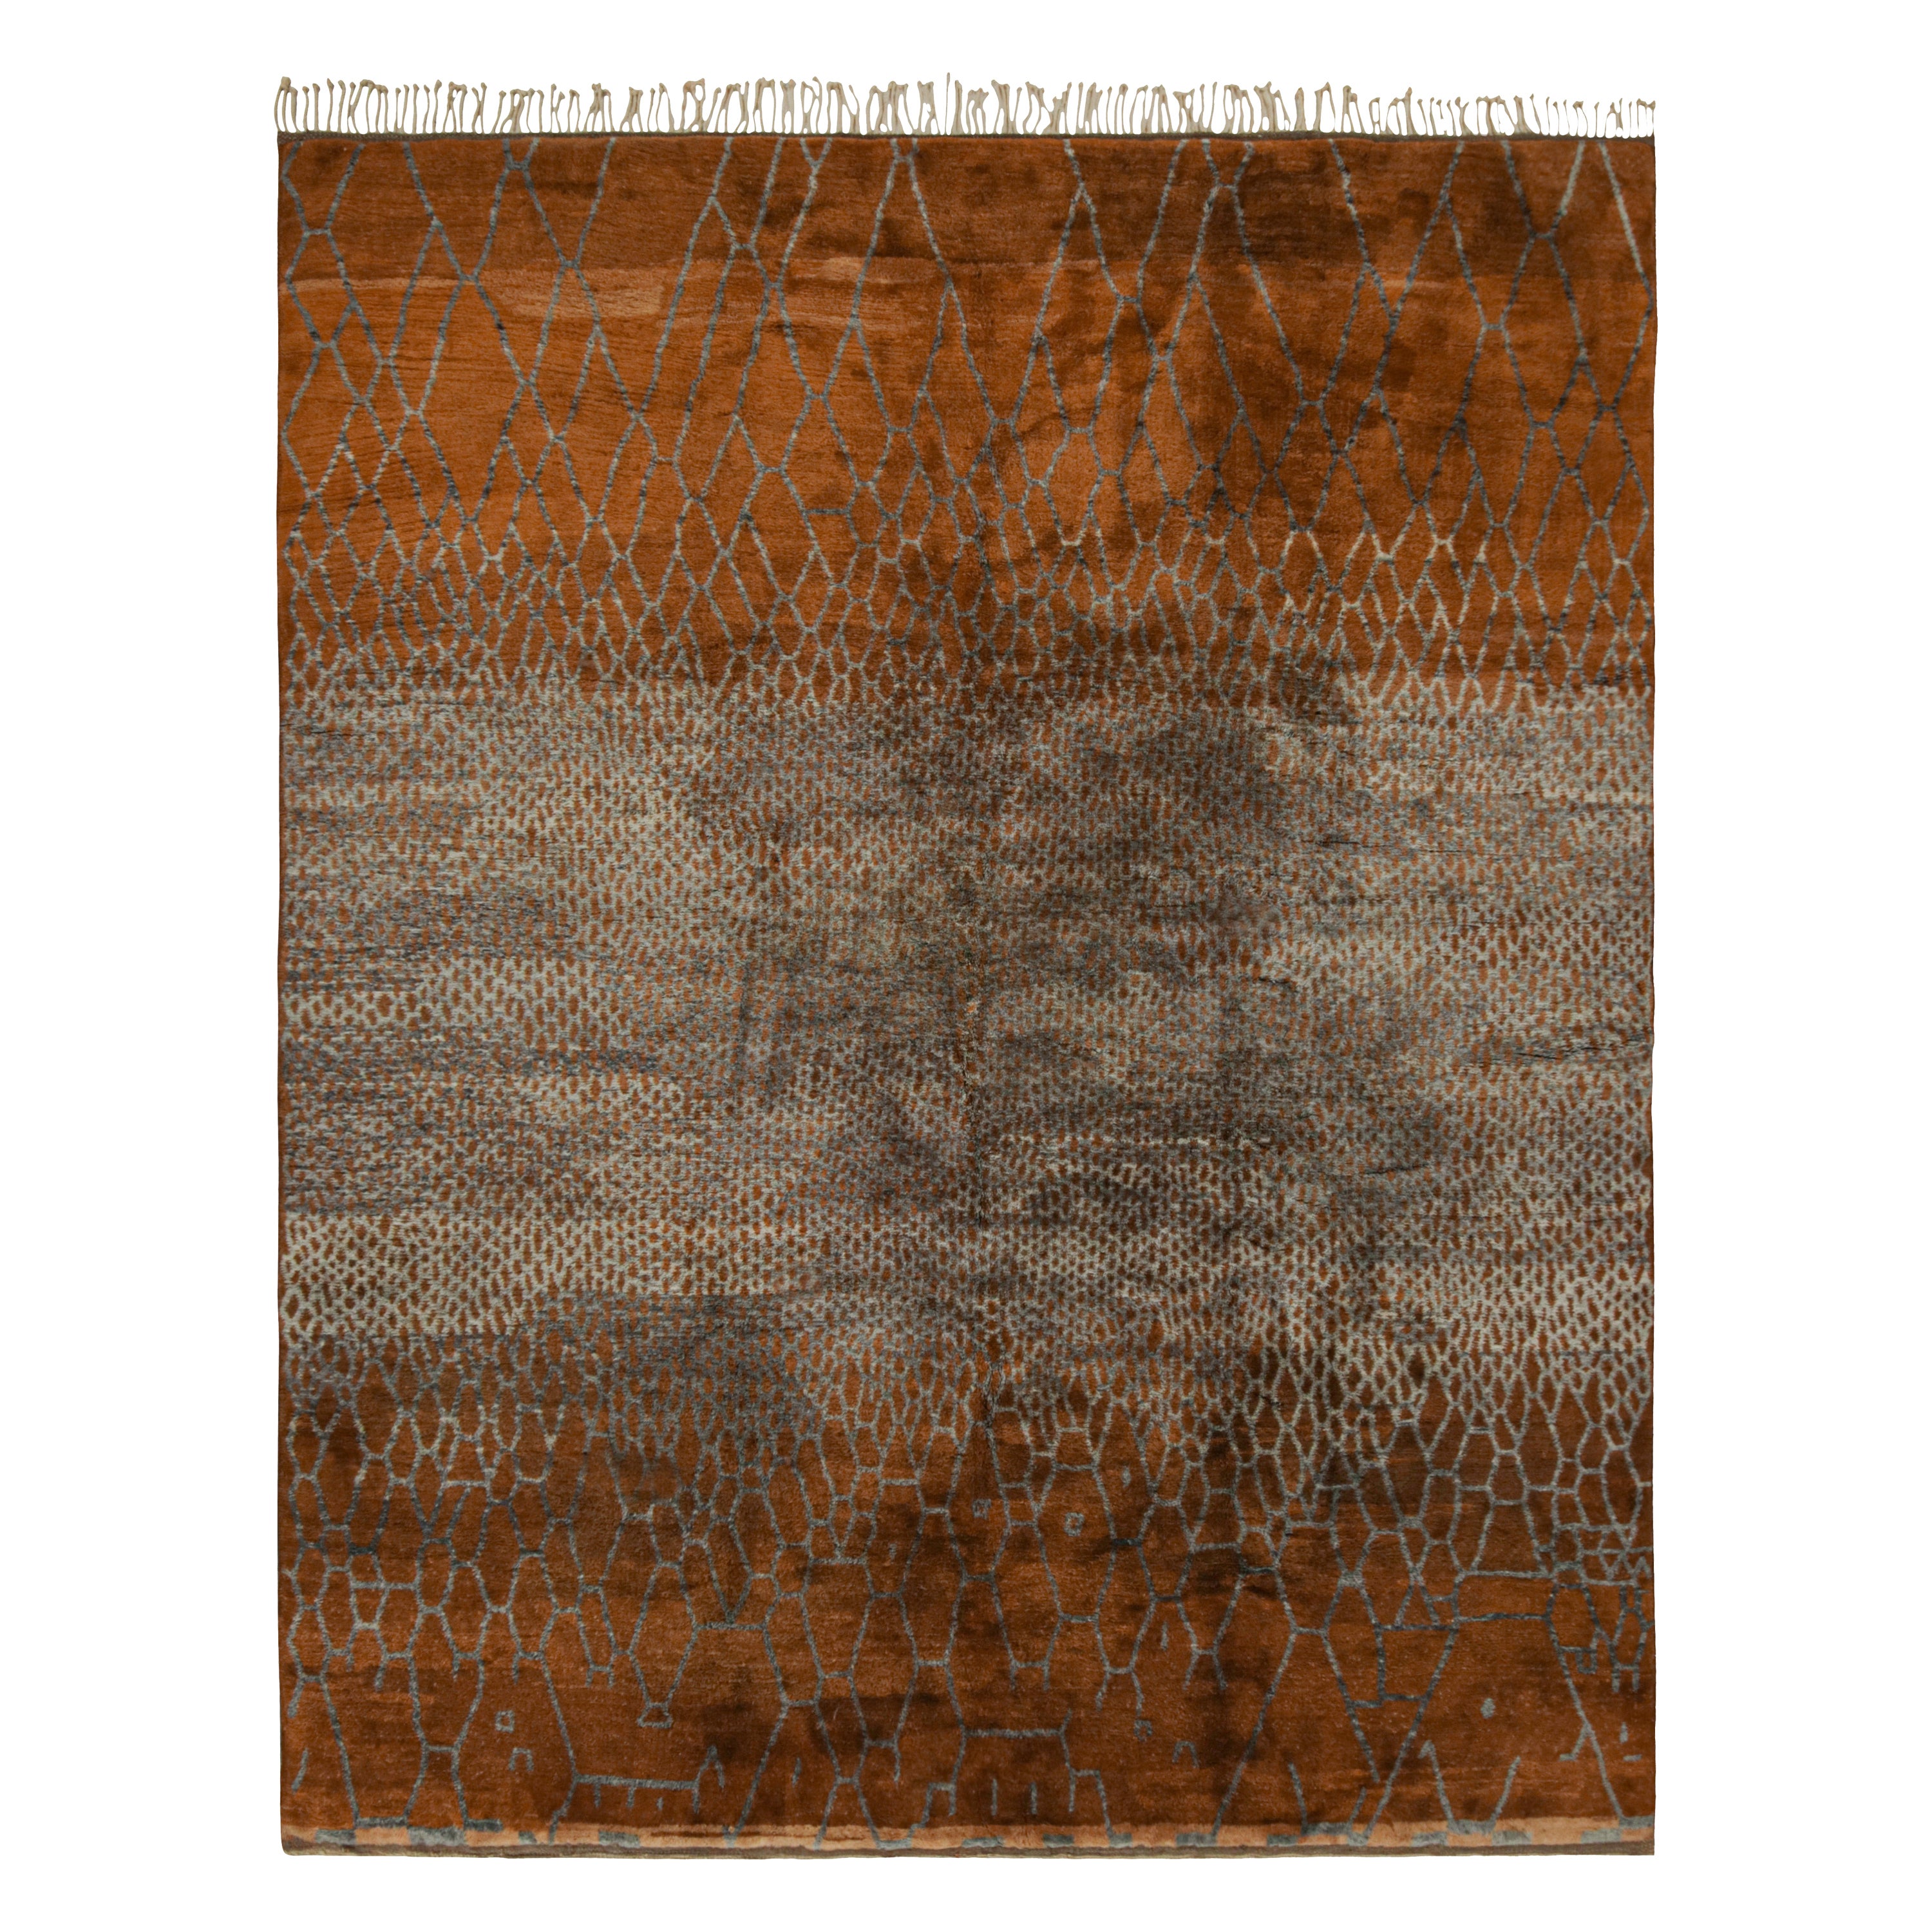 Rug & Kilim’s Moroccan Rug in Rust Tones with Silver-Gray Geometric Patterns